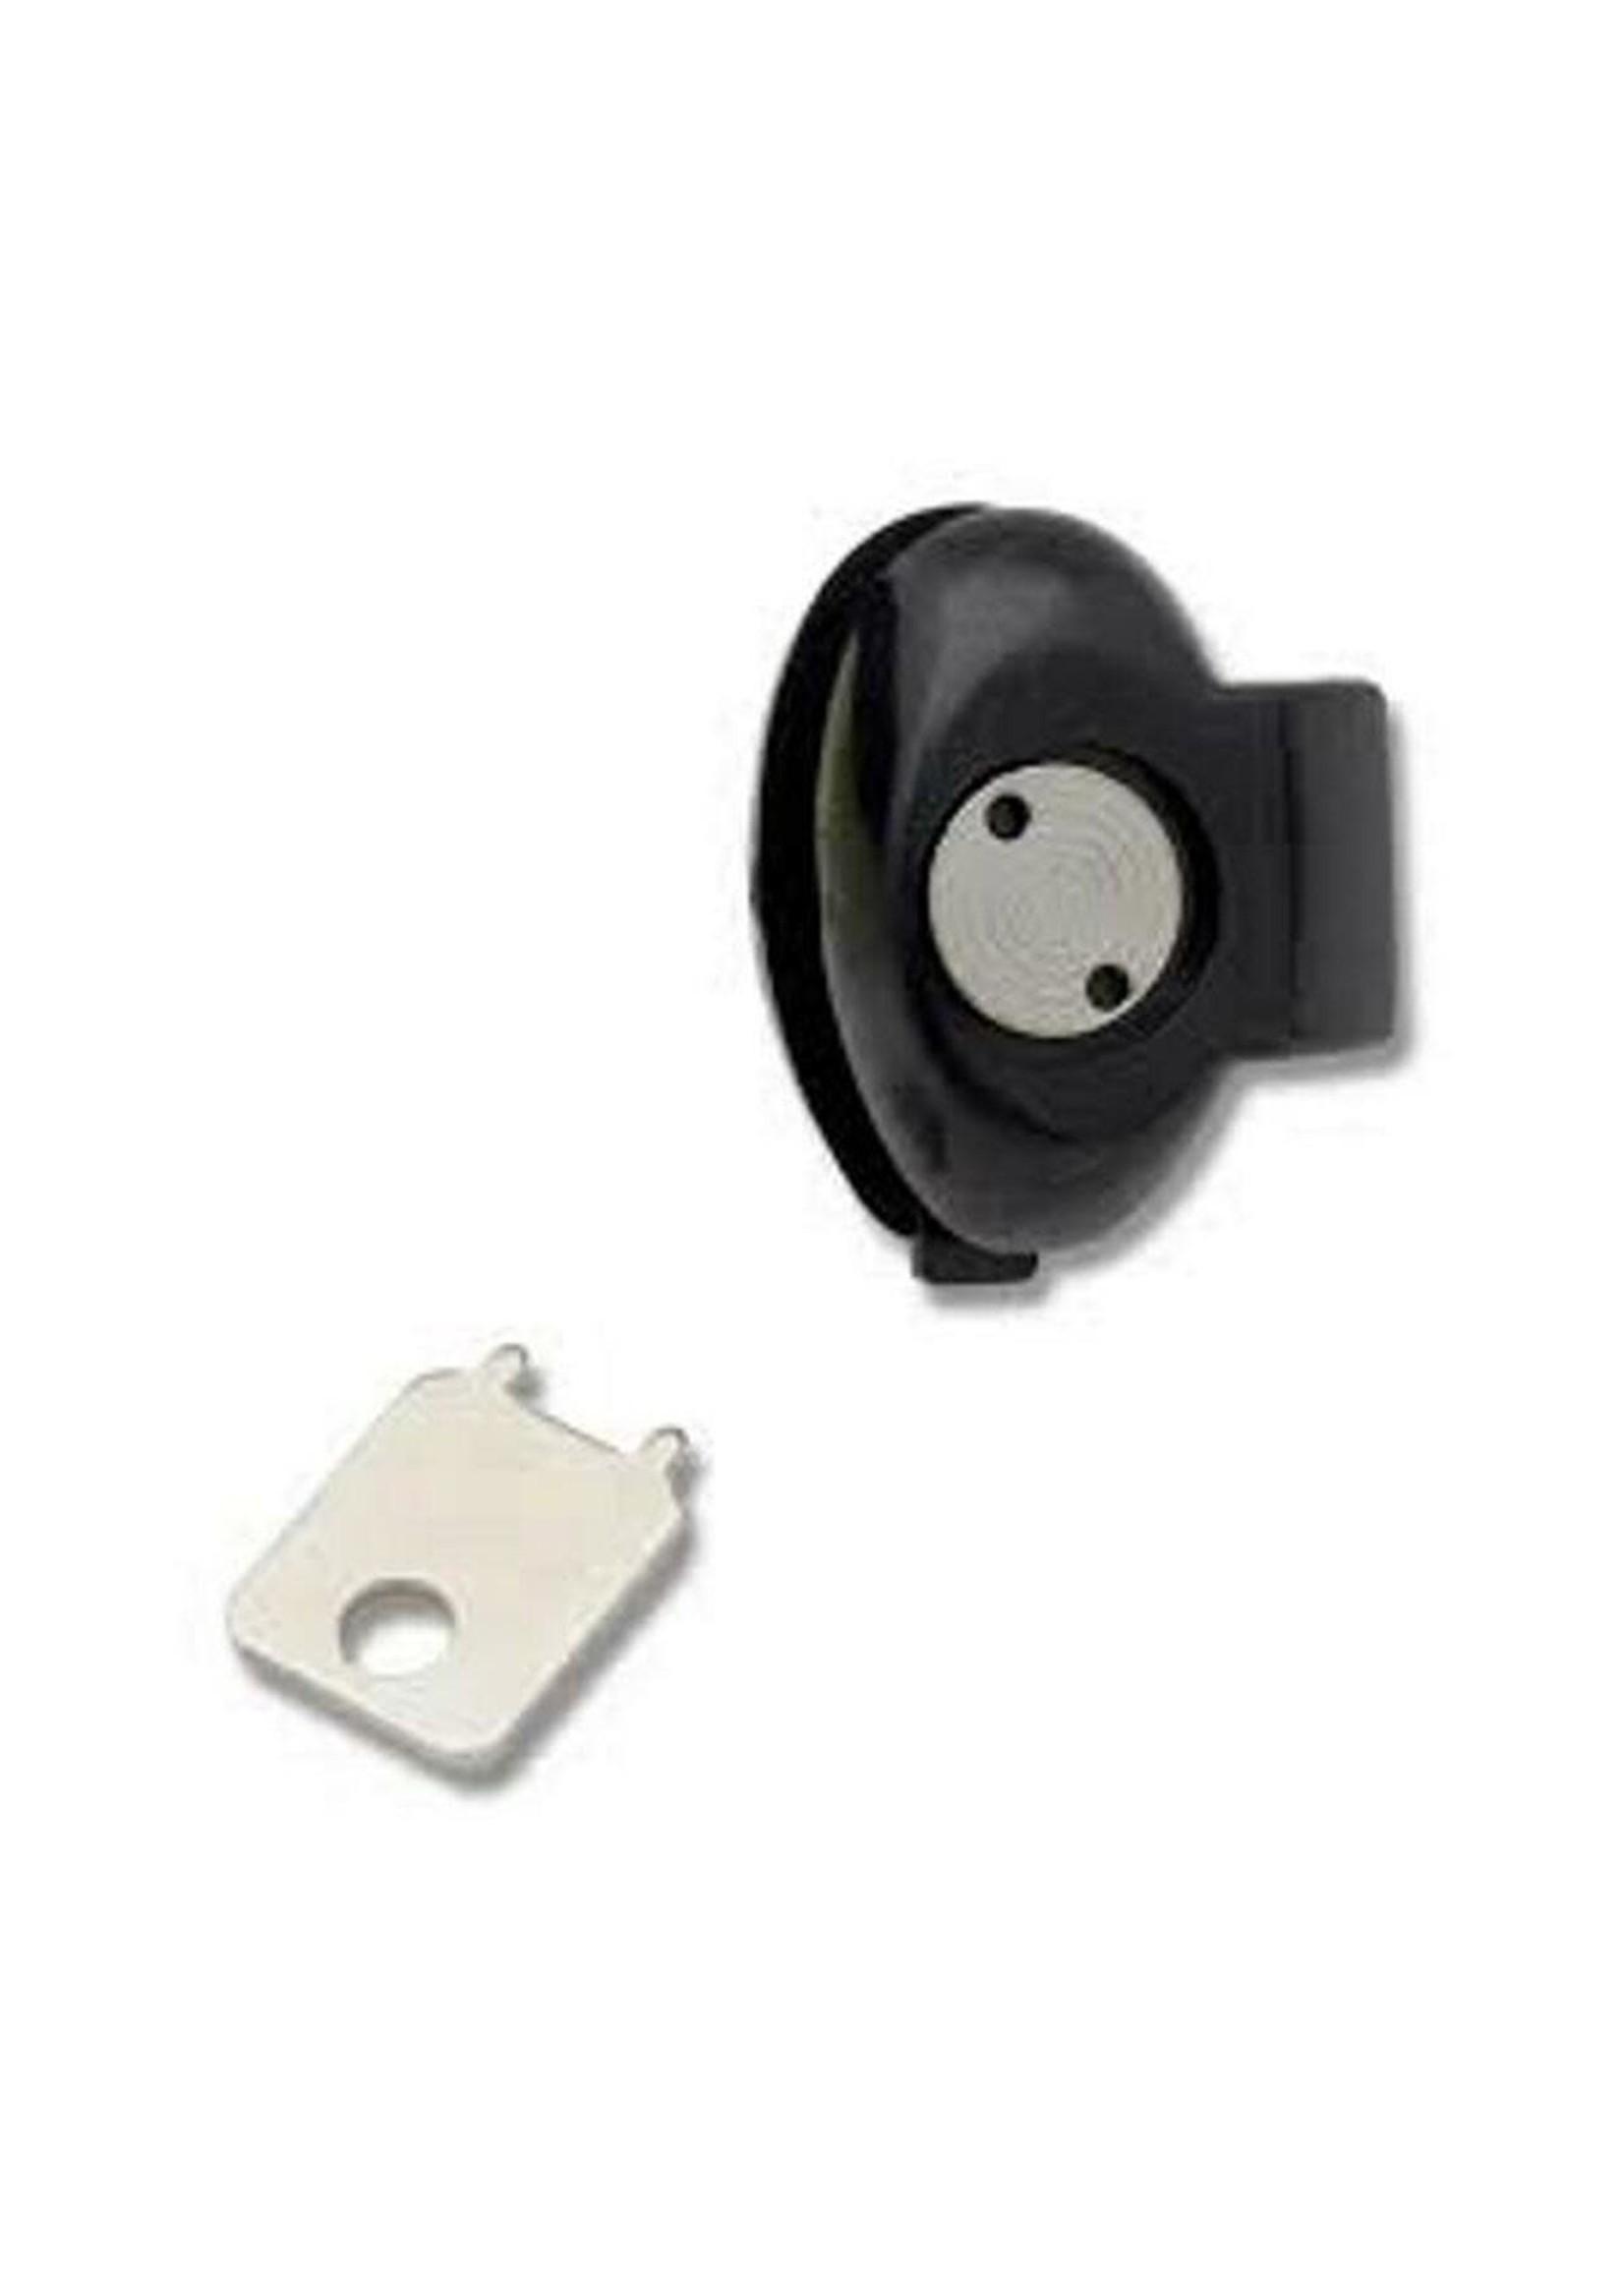 BELL OUTDOOR PRODUCTS BELL TRIGGER LOCK MINI